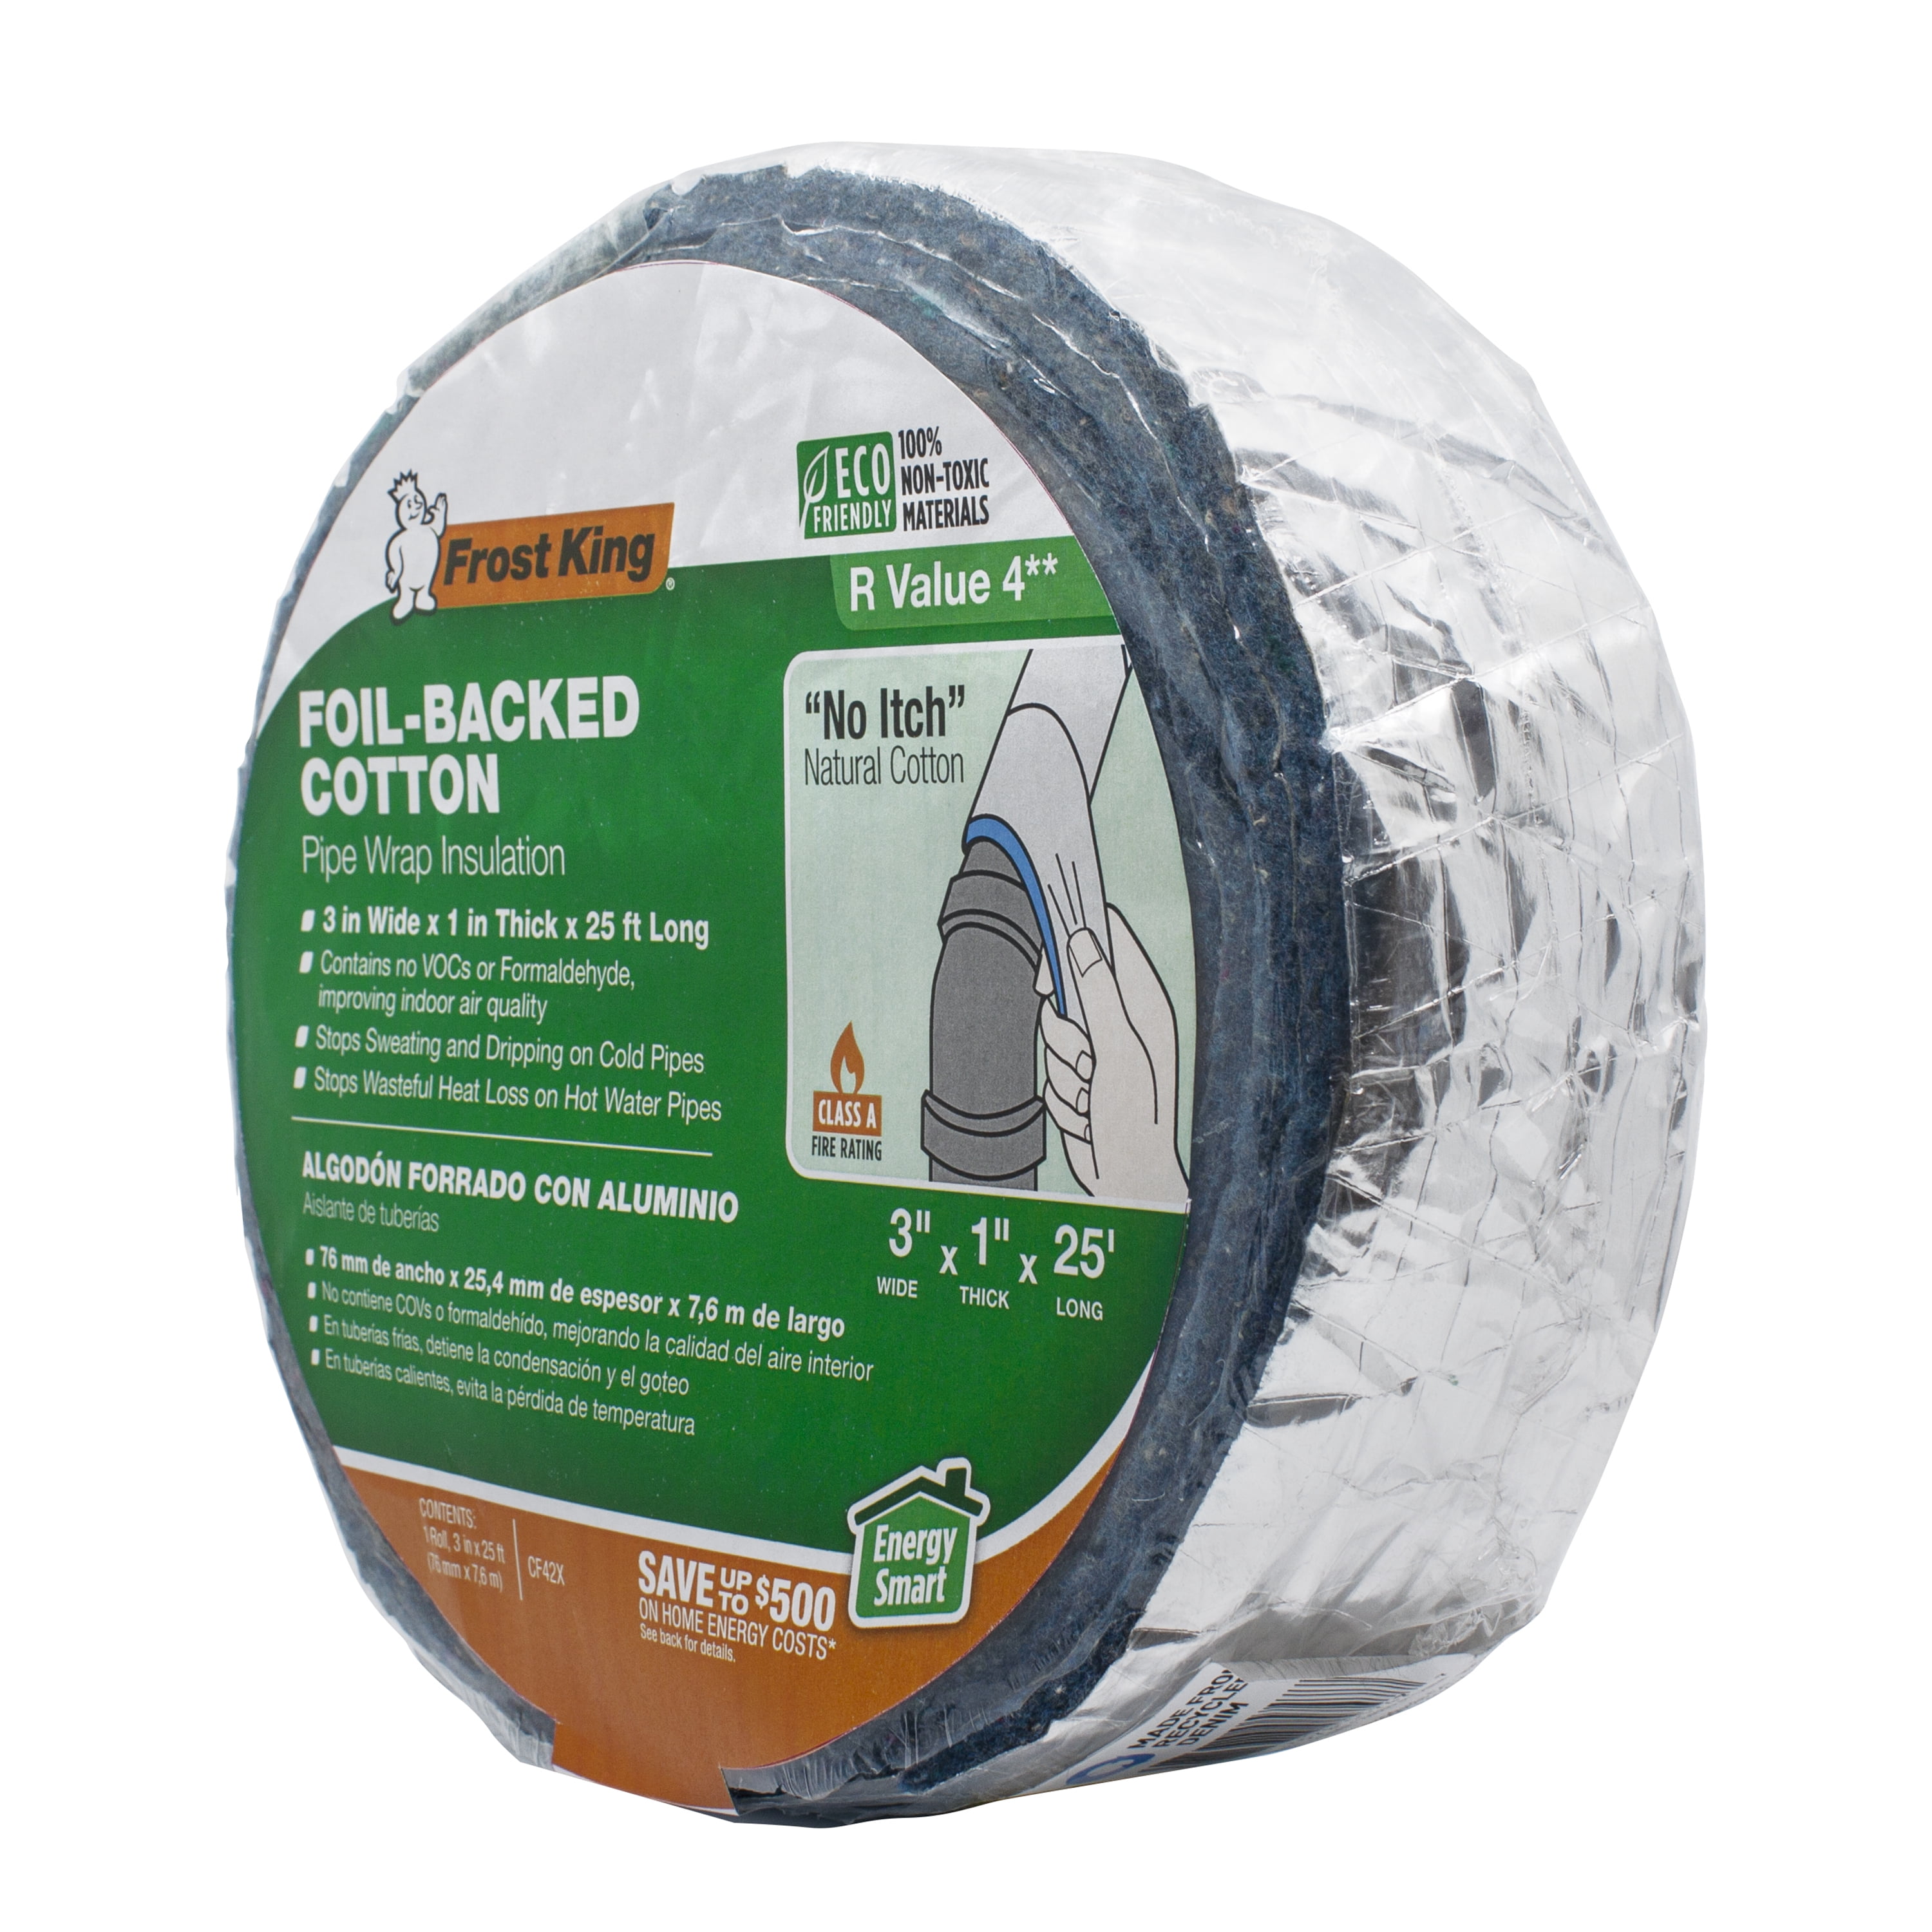 Frost King CF1 No Itch Natural Cotton Multi-Purpose Insulation, 16 x 1 x  48-Inch - Roofing Materials 